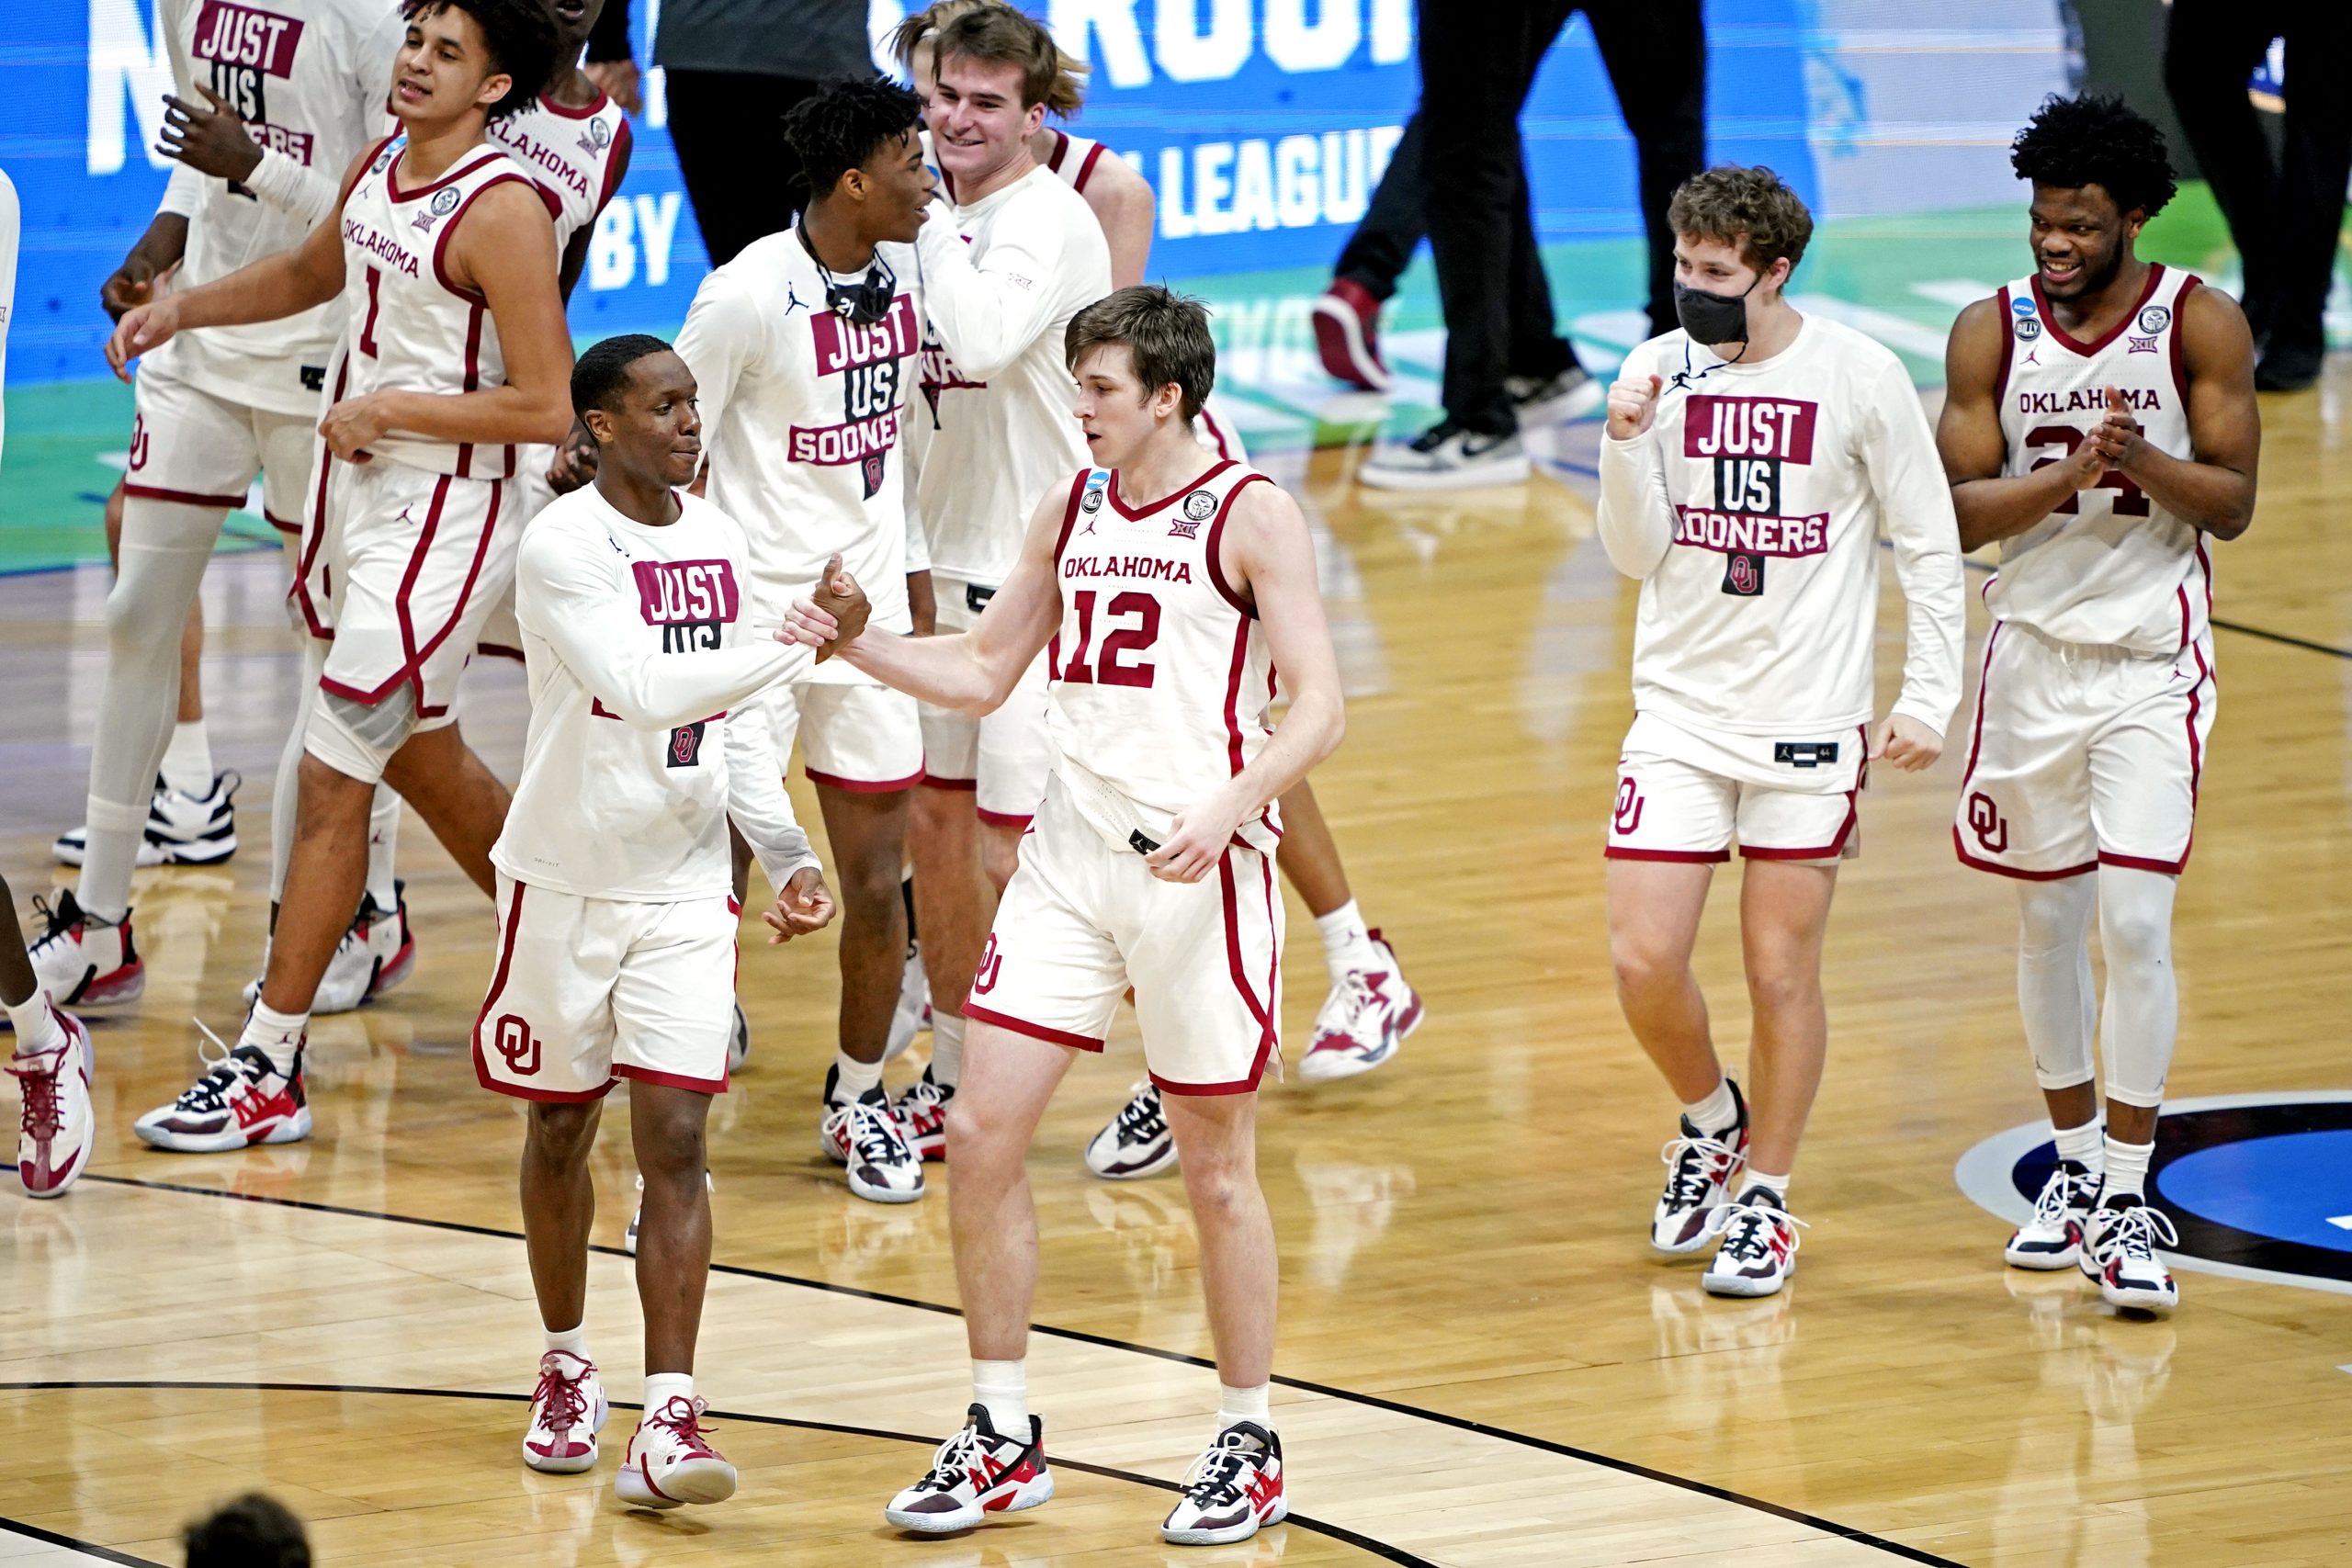 The Oklahoma Sooners celebrate after beating the Missouri Tigers in the first round of the 2021 NCAA Tournament at Lucas Oil Stadium.